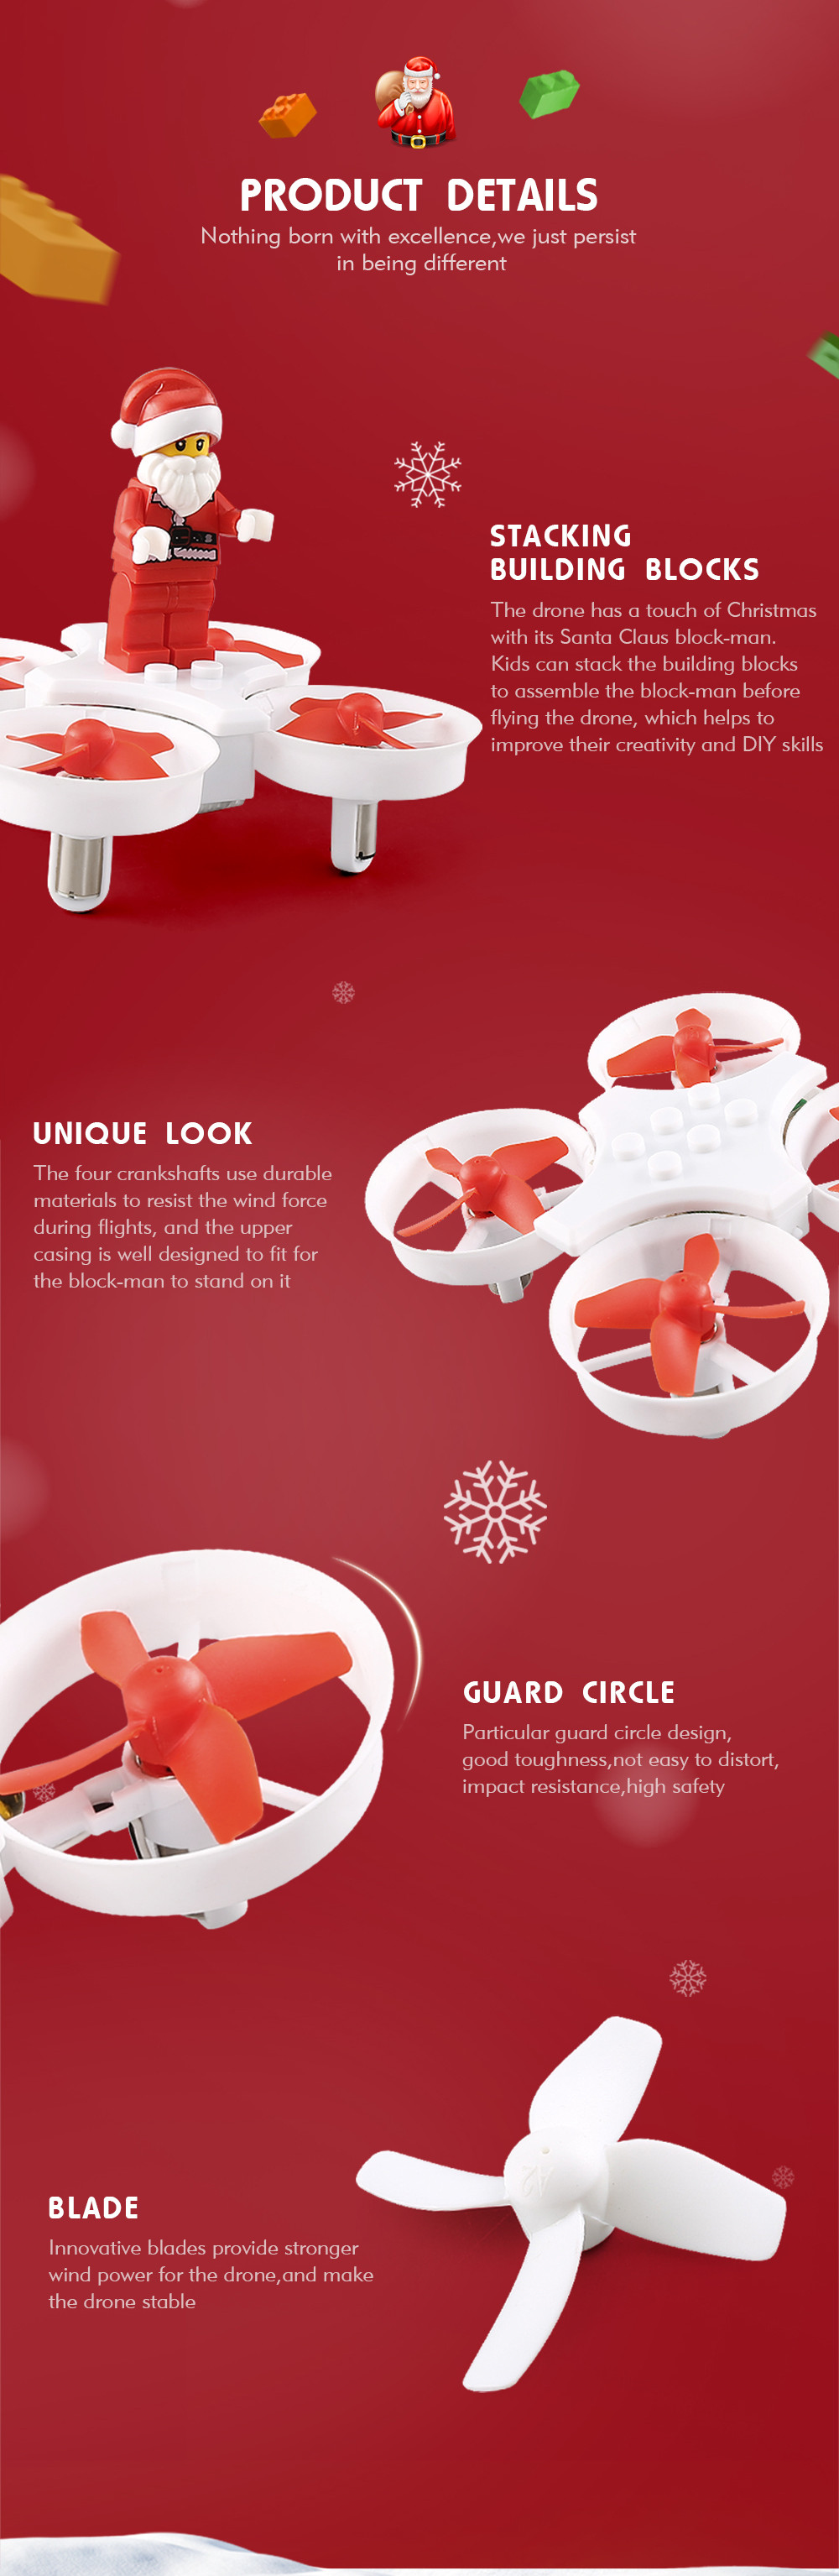 JJRC-H67-Flying-Santa-Claus-With-Christmas-Songs-716-Motor-Headless-Mode-RC-Drone-Quadcopter-1380290